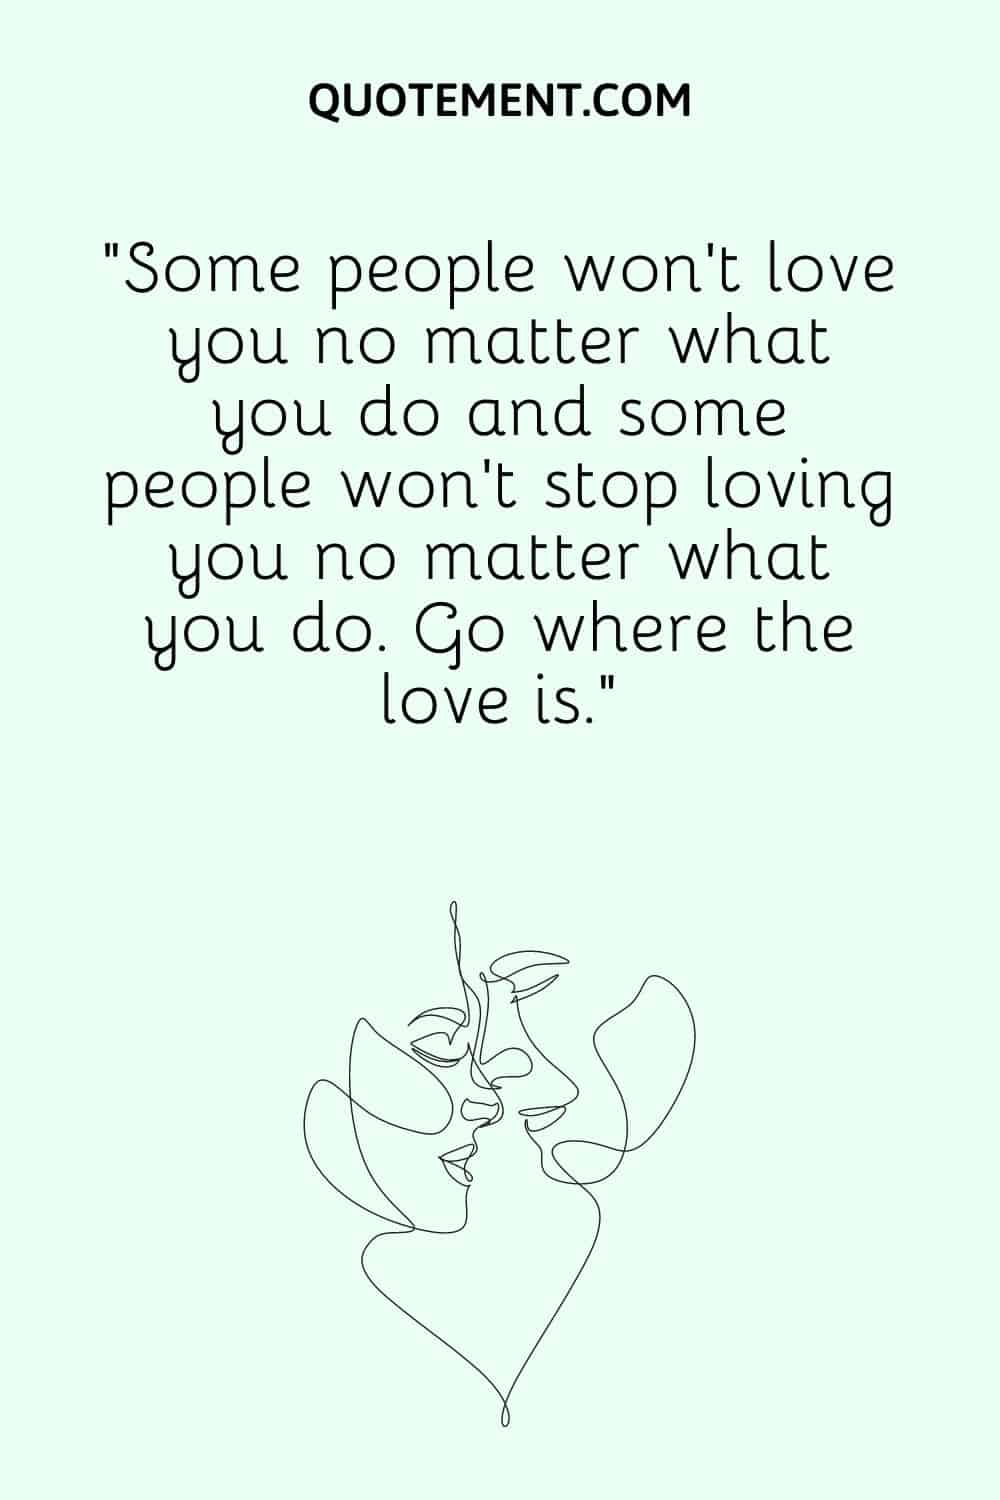 “Some people won’t love you no matter what you do and some people won’t stop loving you no matter what you do. Go where the love is.”